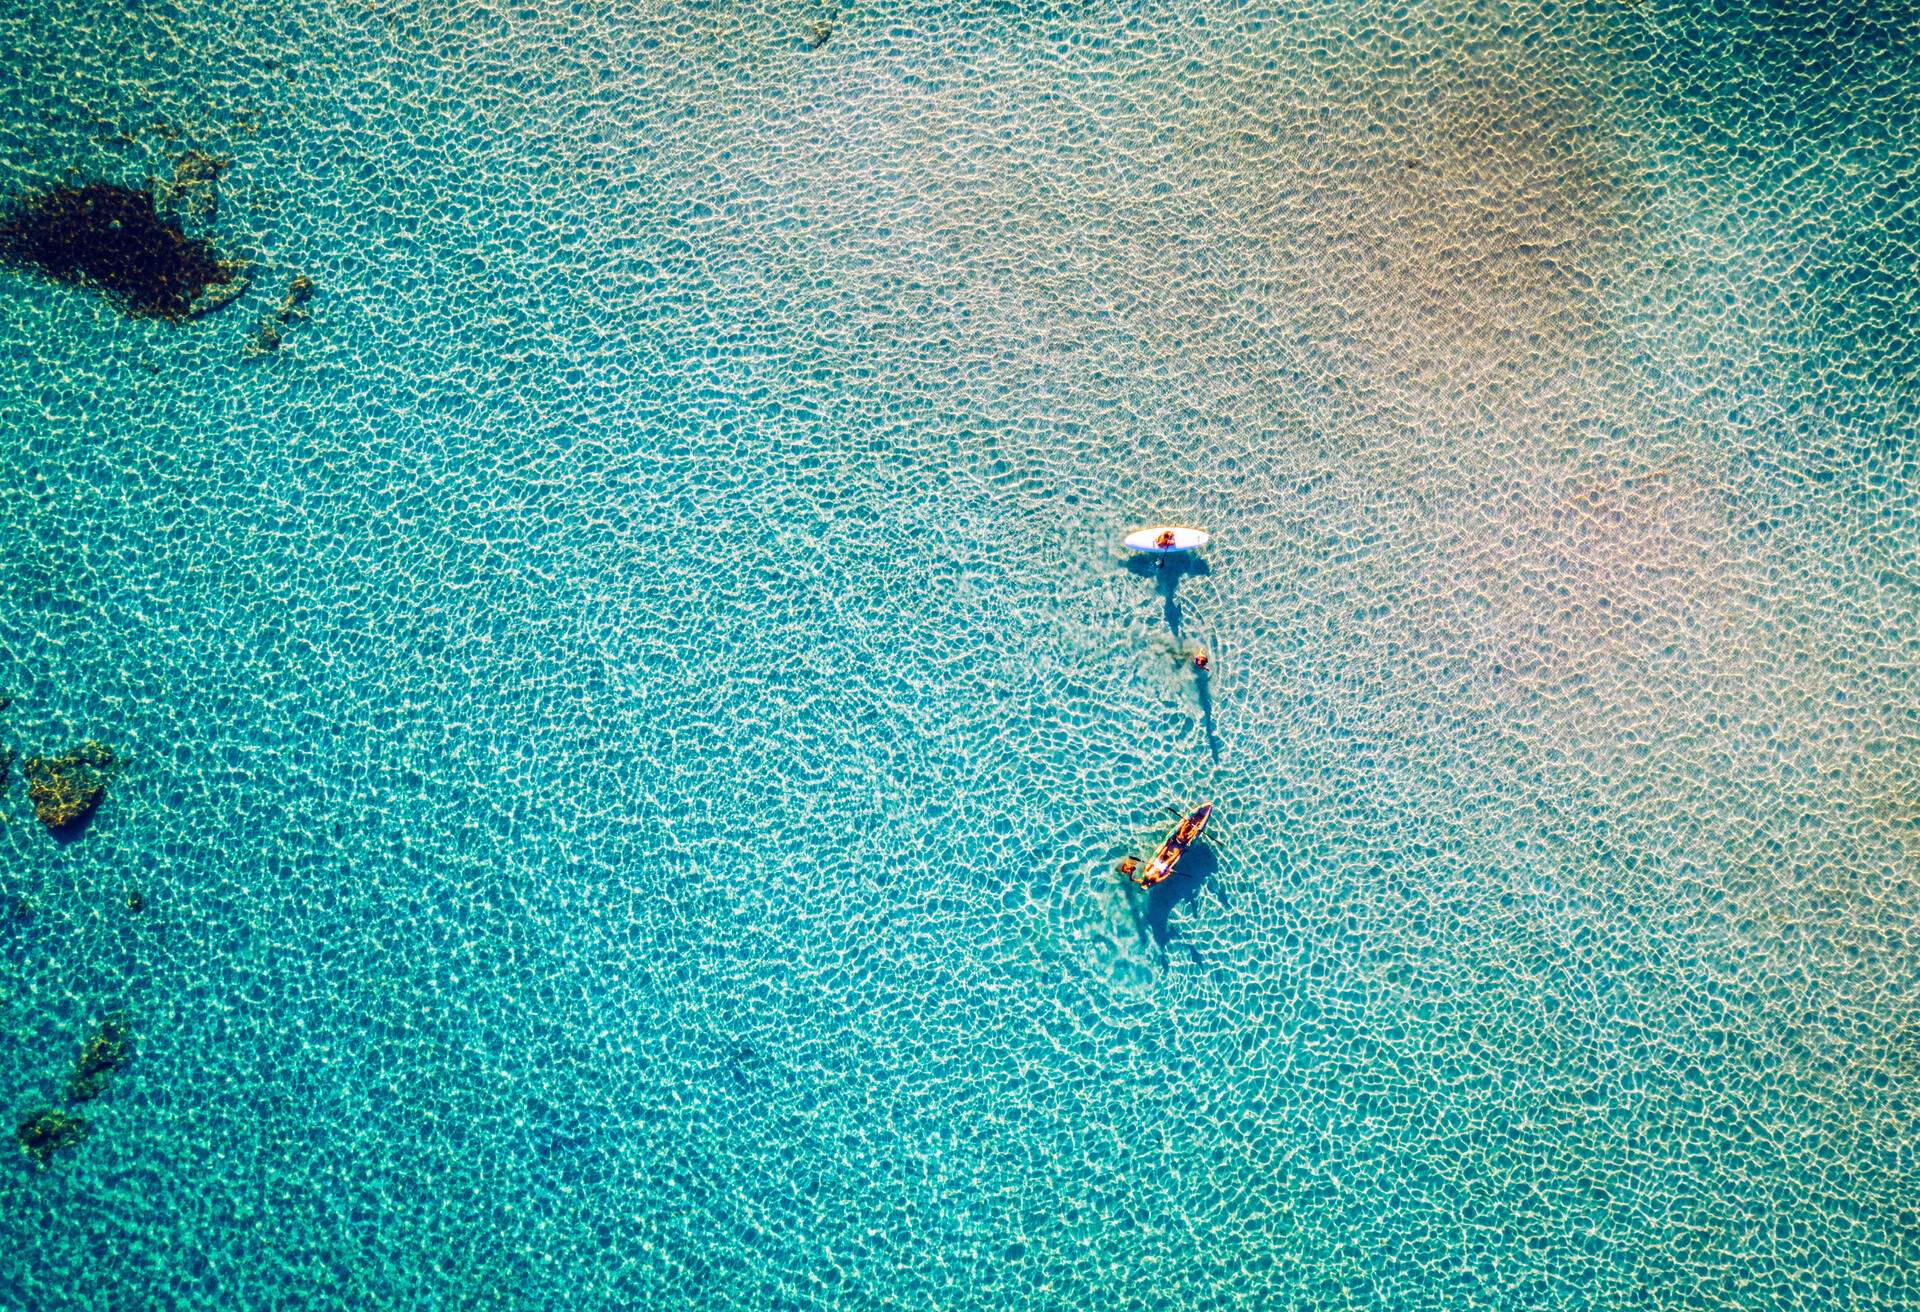 People enjoying a sunny day in the glistening turquoise sea.